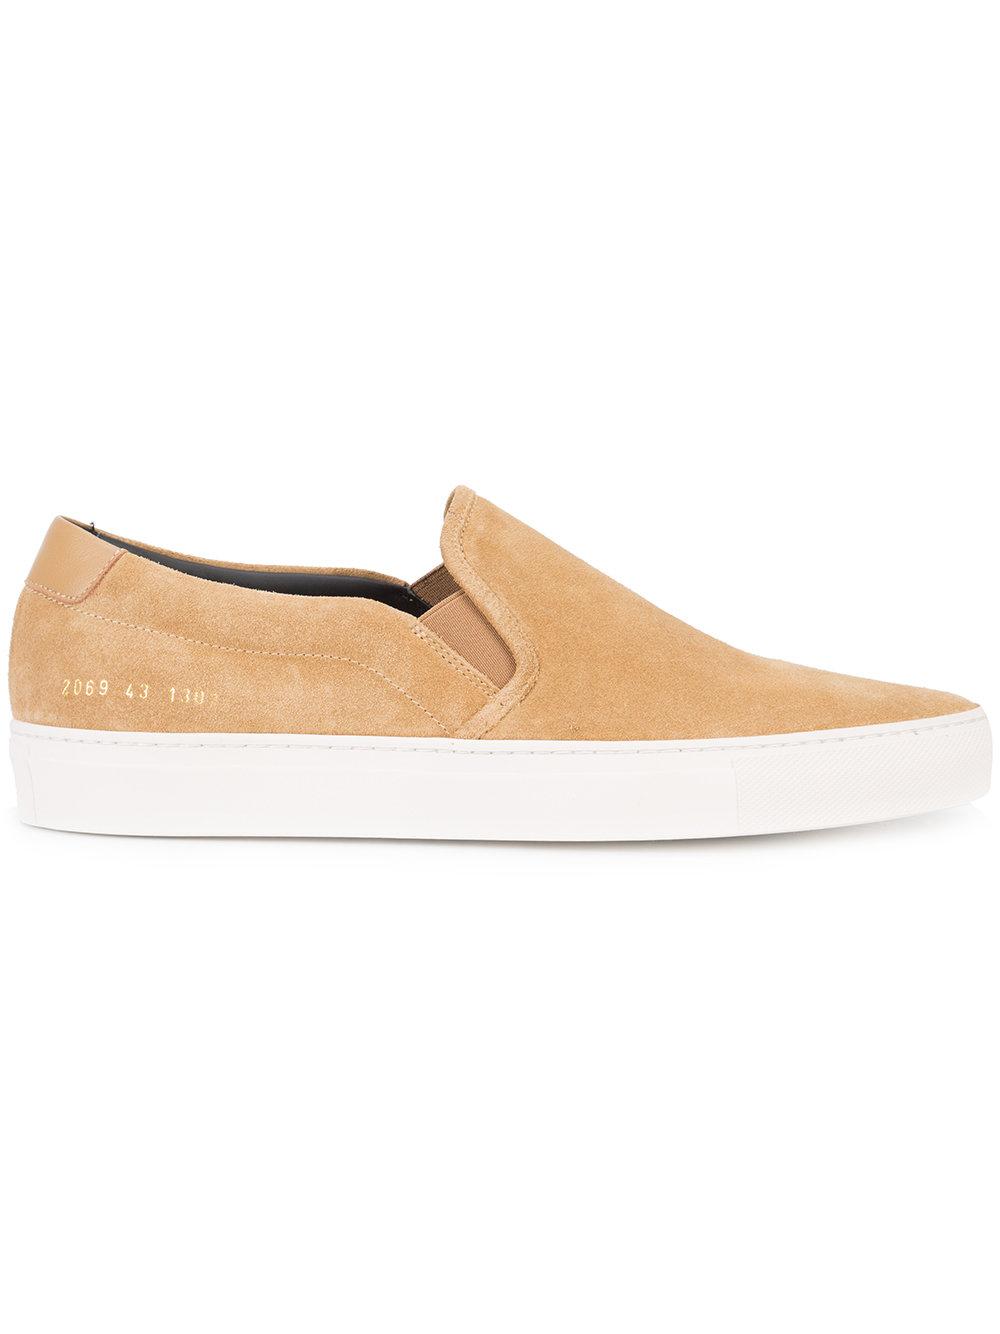 Common projects Slip-on Sneakers in Brown for Men | Lyst